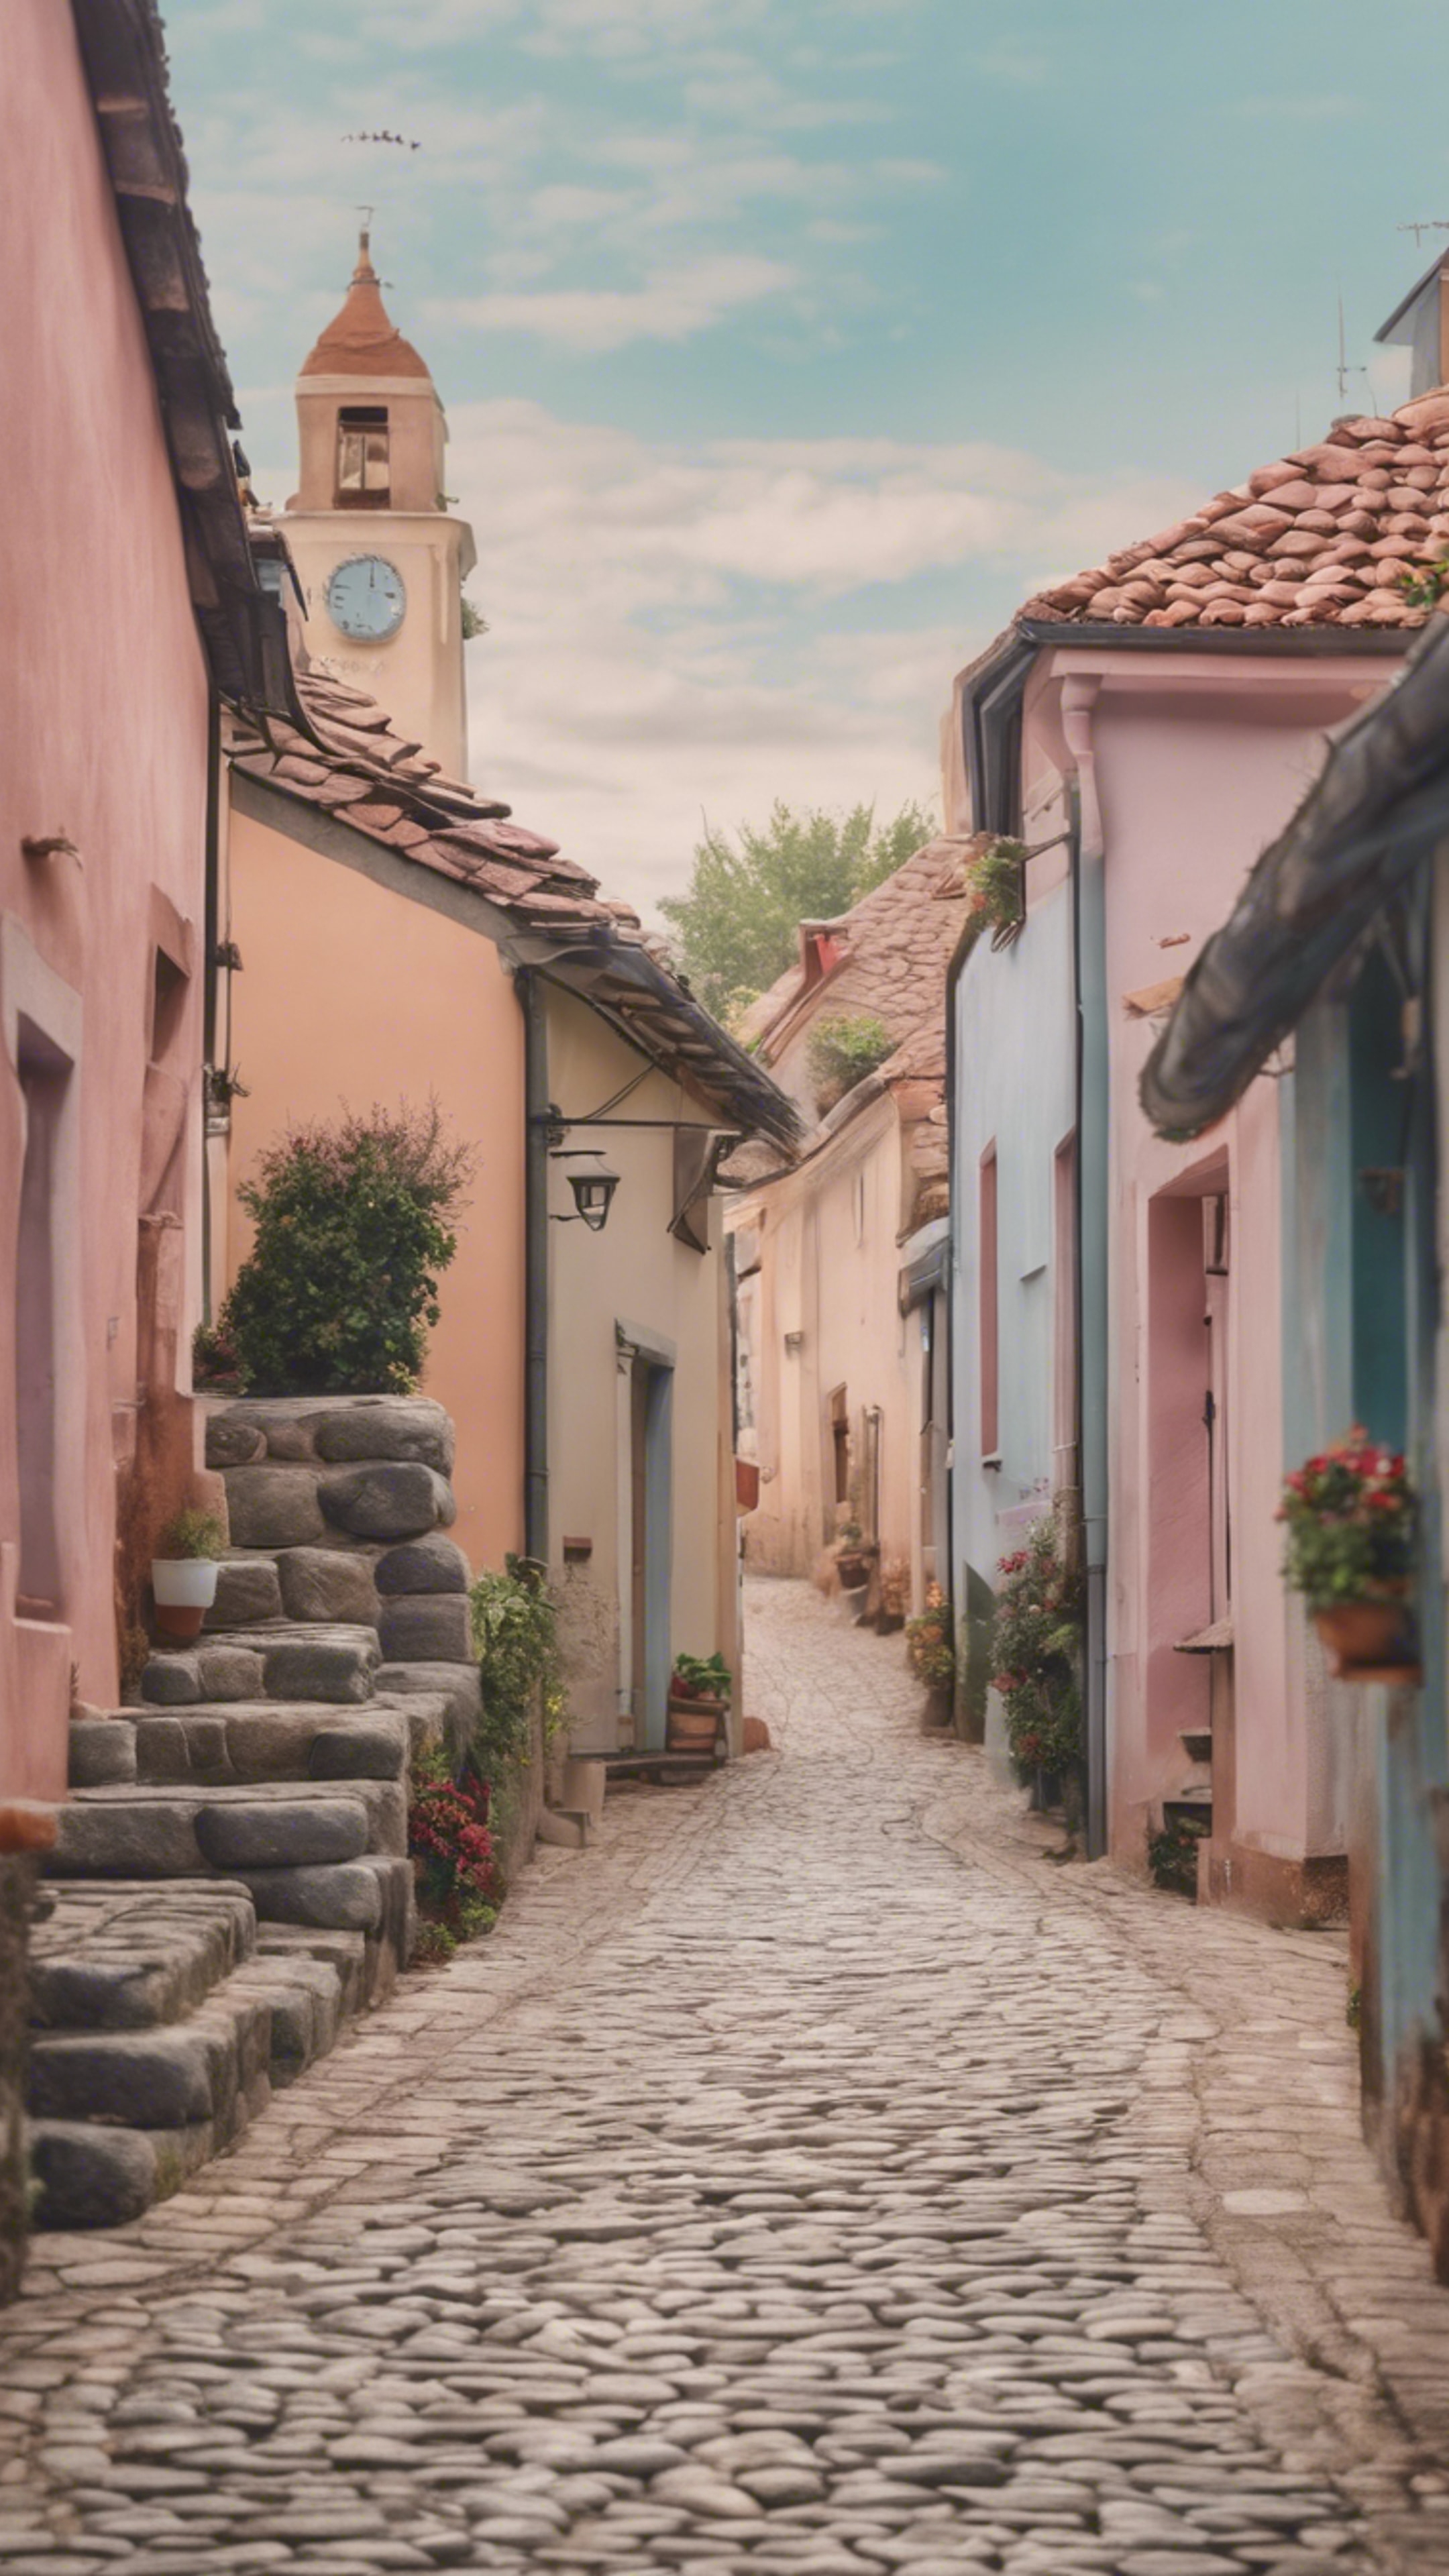 A cobblestone village bathed in soft pastel hues in the dreamtime. Wallpaper[3cfafe61ce0f4ae38cdf]